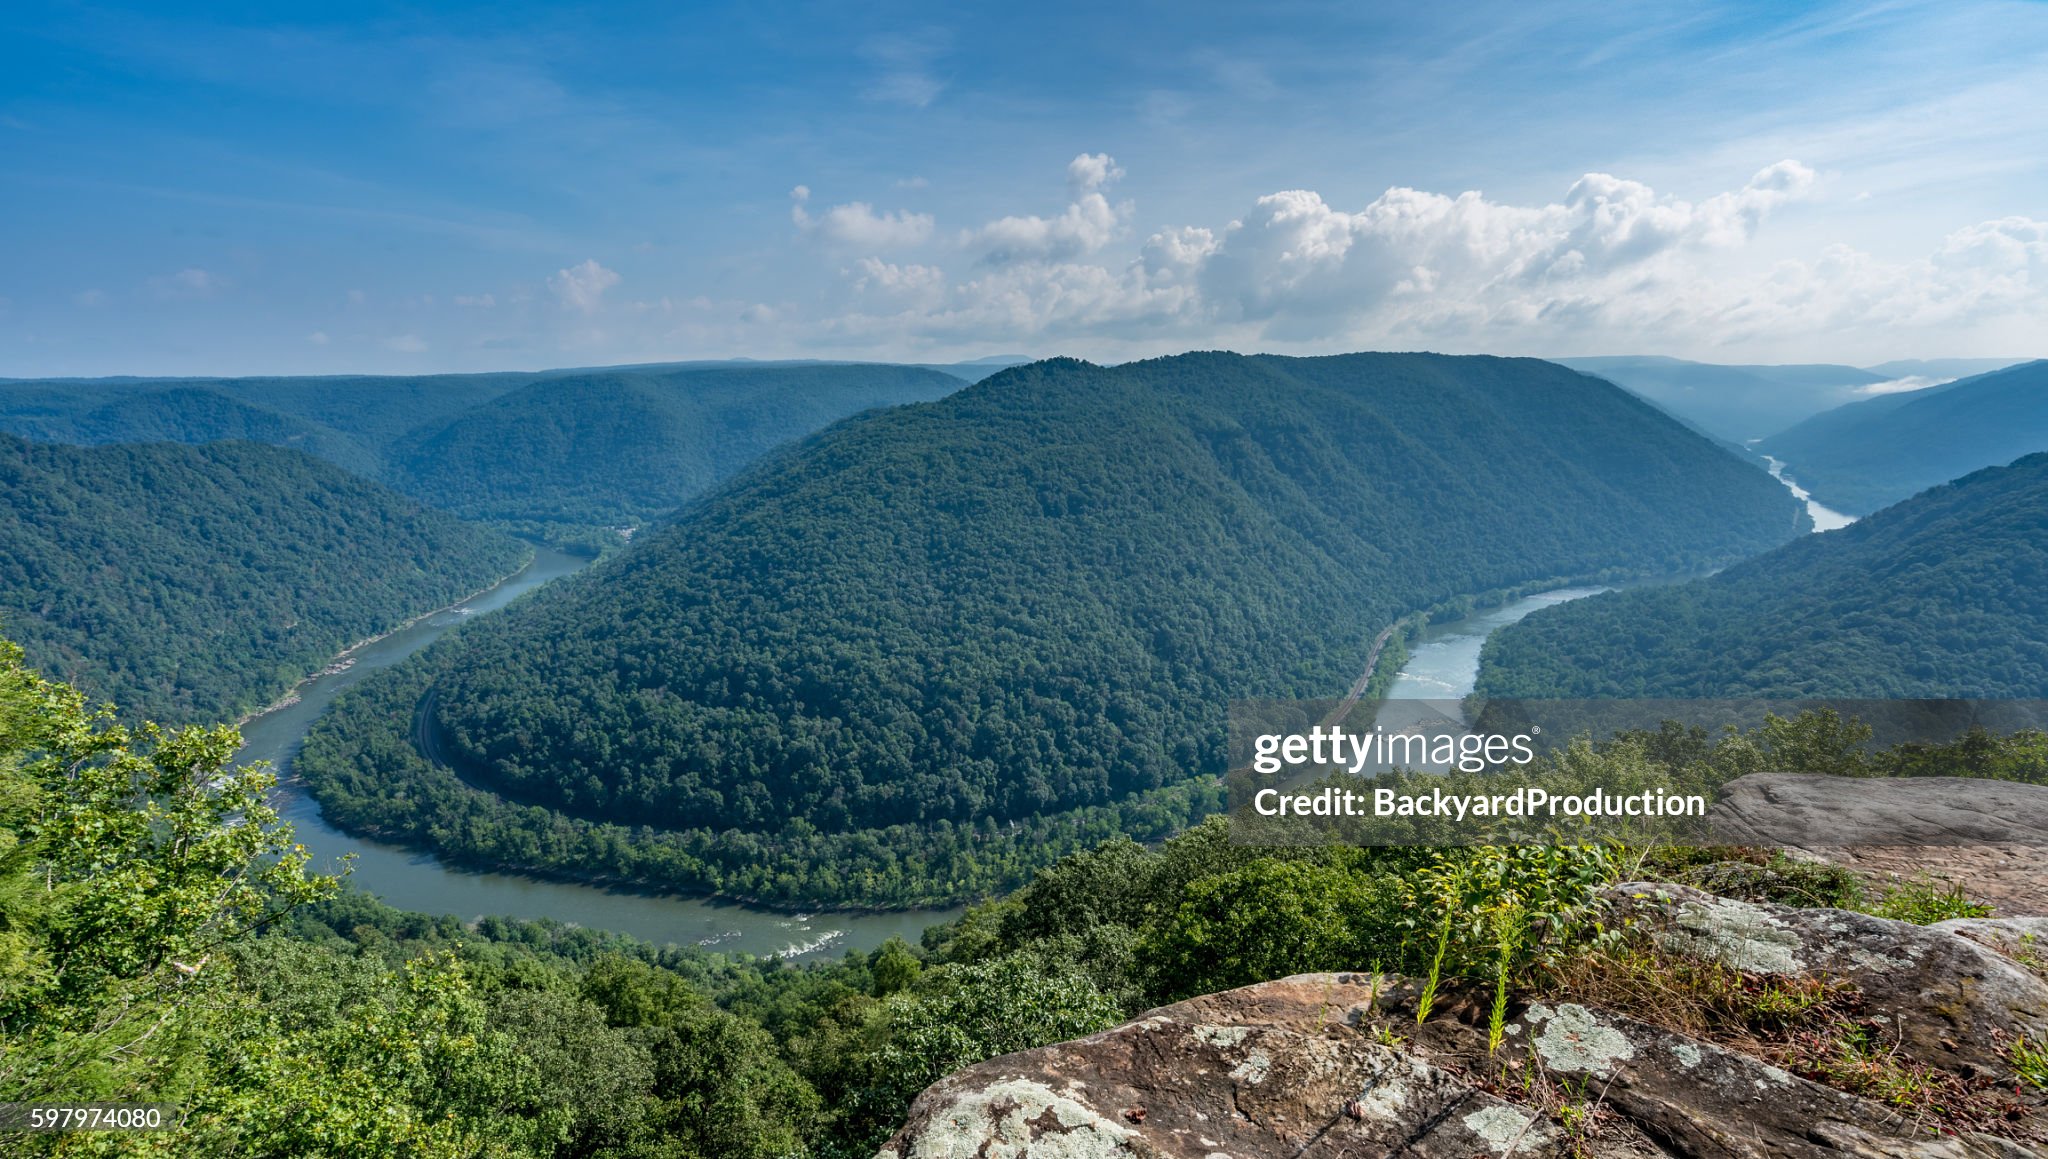 New River Gorge in West Virginia